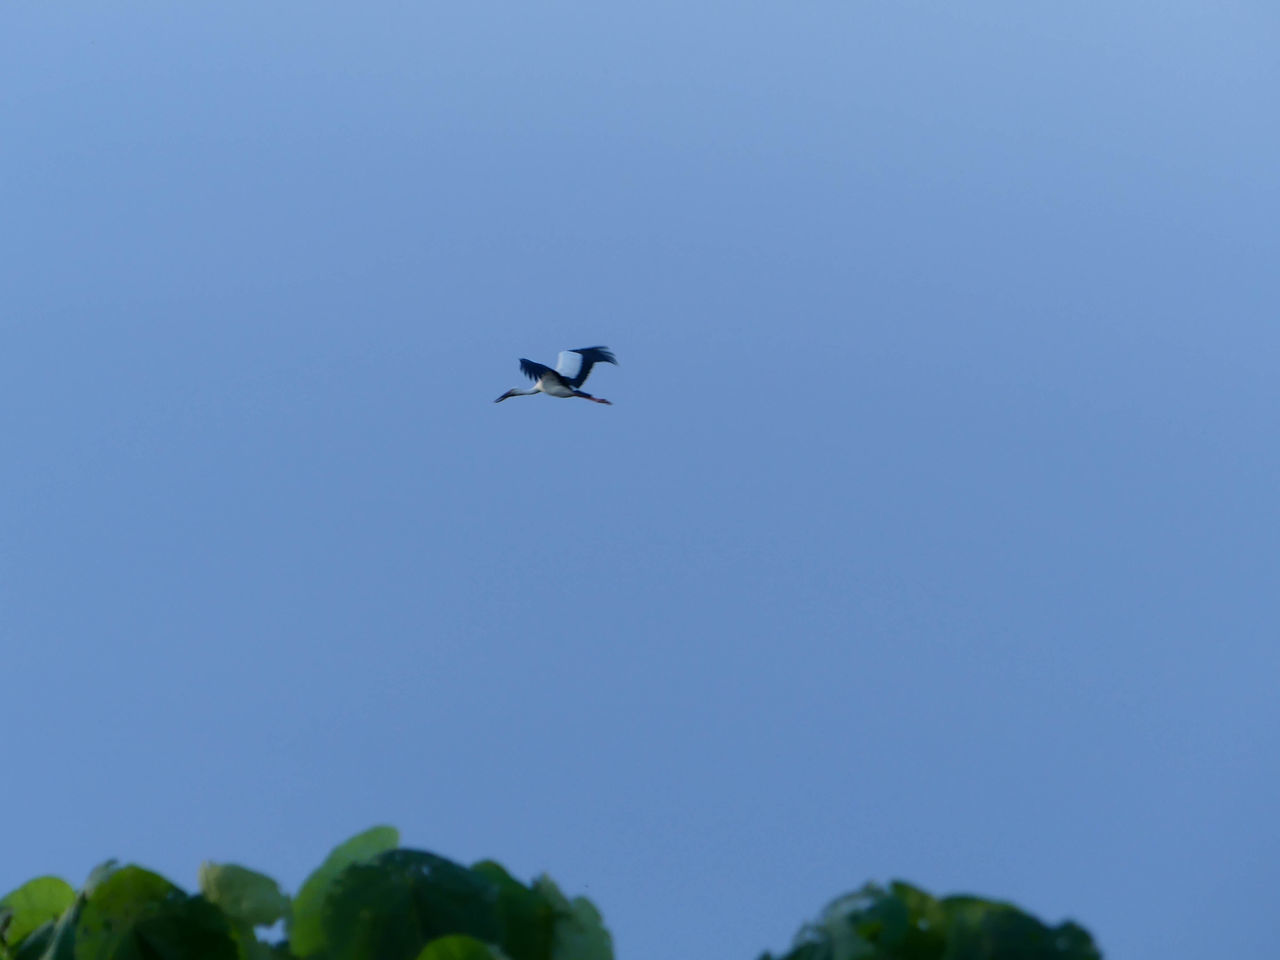 flying, sky, air vehicle, low angle view, nature, blue, mid-air, clear sky, airplane, mode of transportation, transportation, no people, bird, plant, tree, motion, day, outdoors, animal wildlife, animal themes, animal, travel, copy space, one animal, on the move, wildlife, vehicle